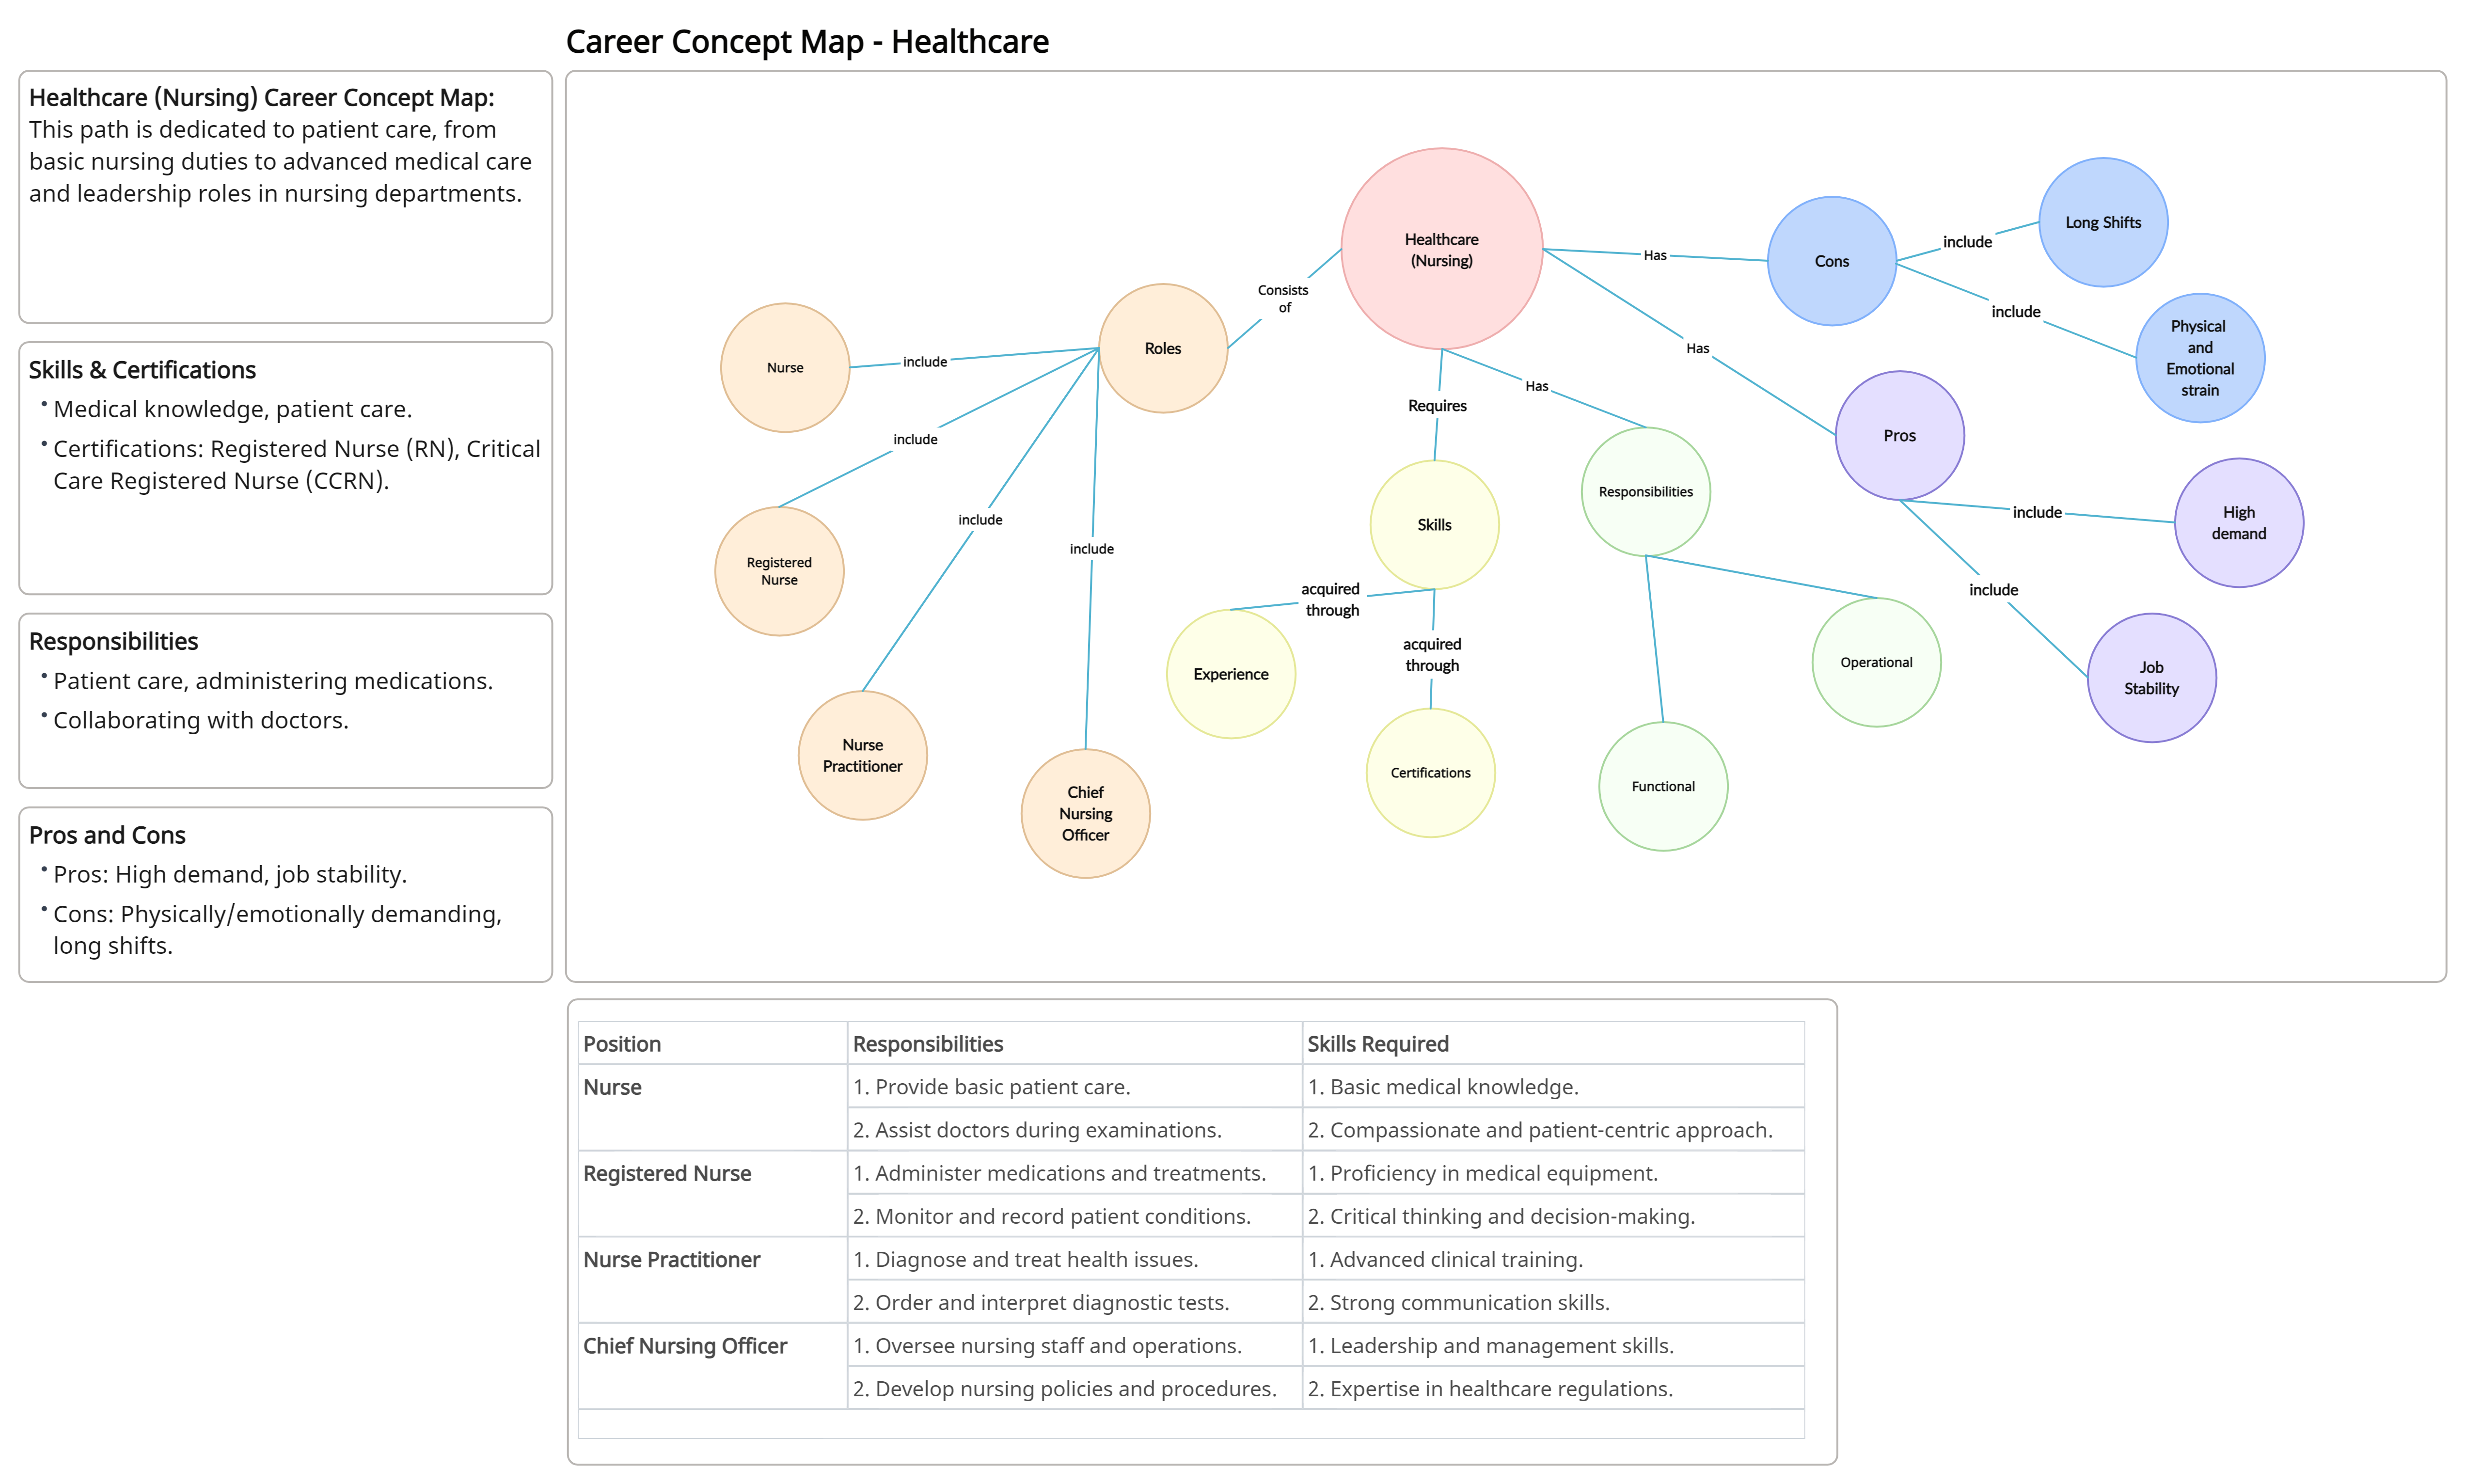 Healthcare Career Concept Map